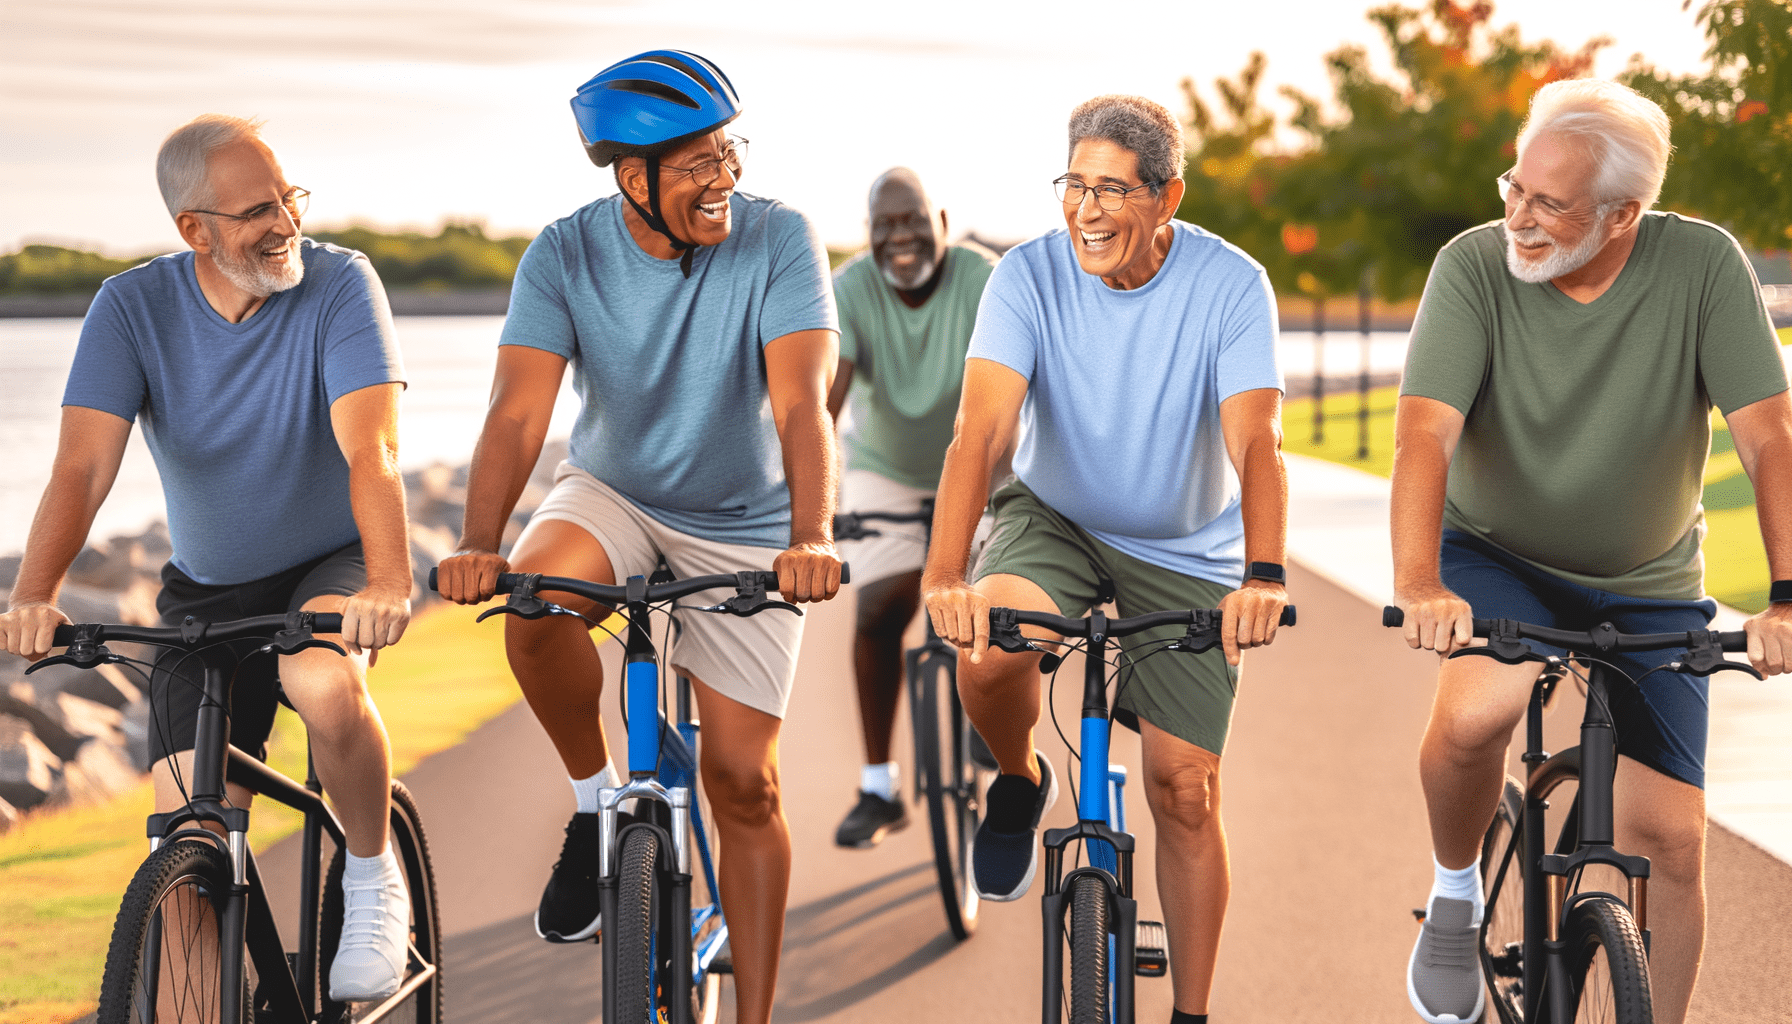 Senior Cycling Groups: Pedaling Towards Health and Friendship